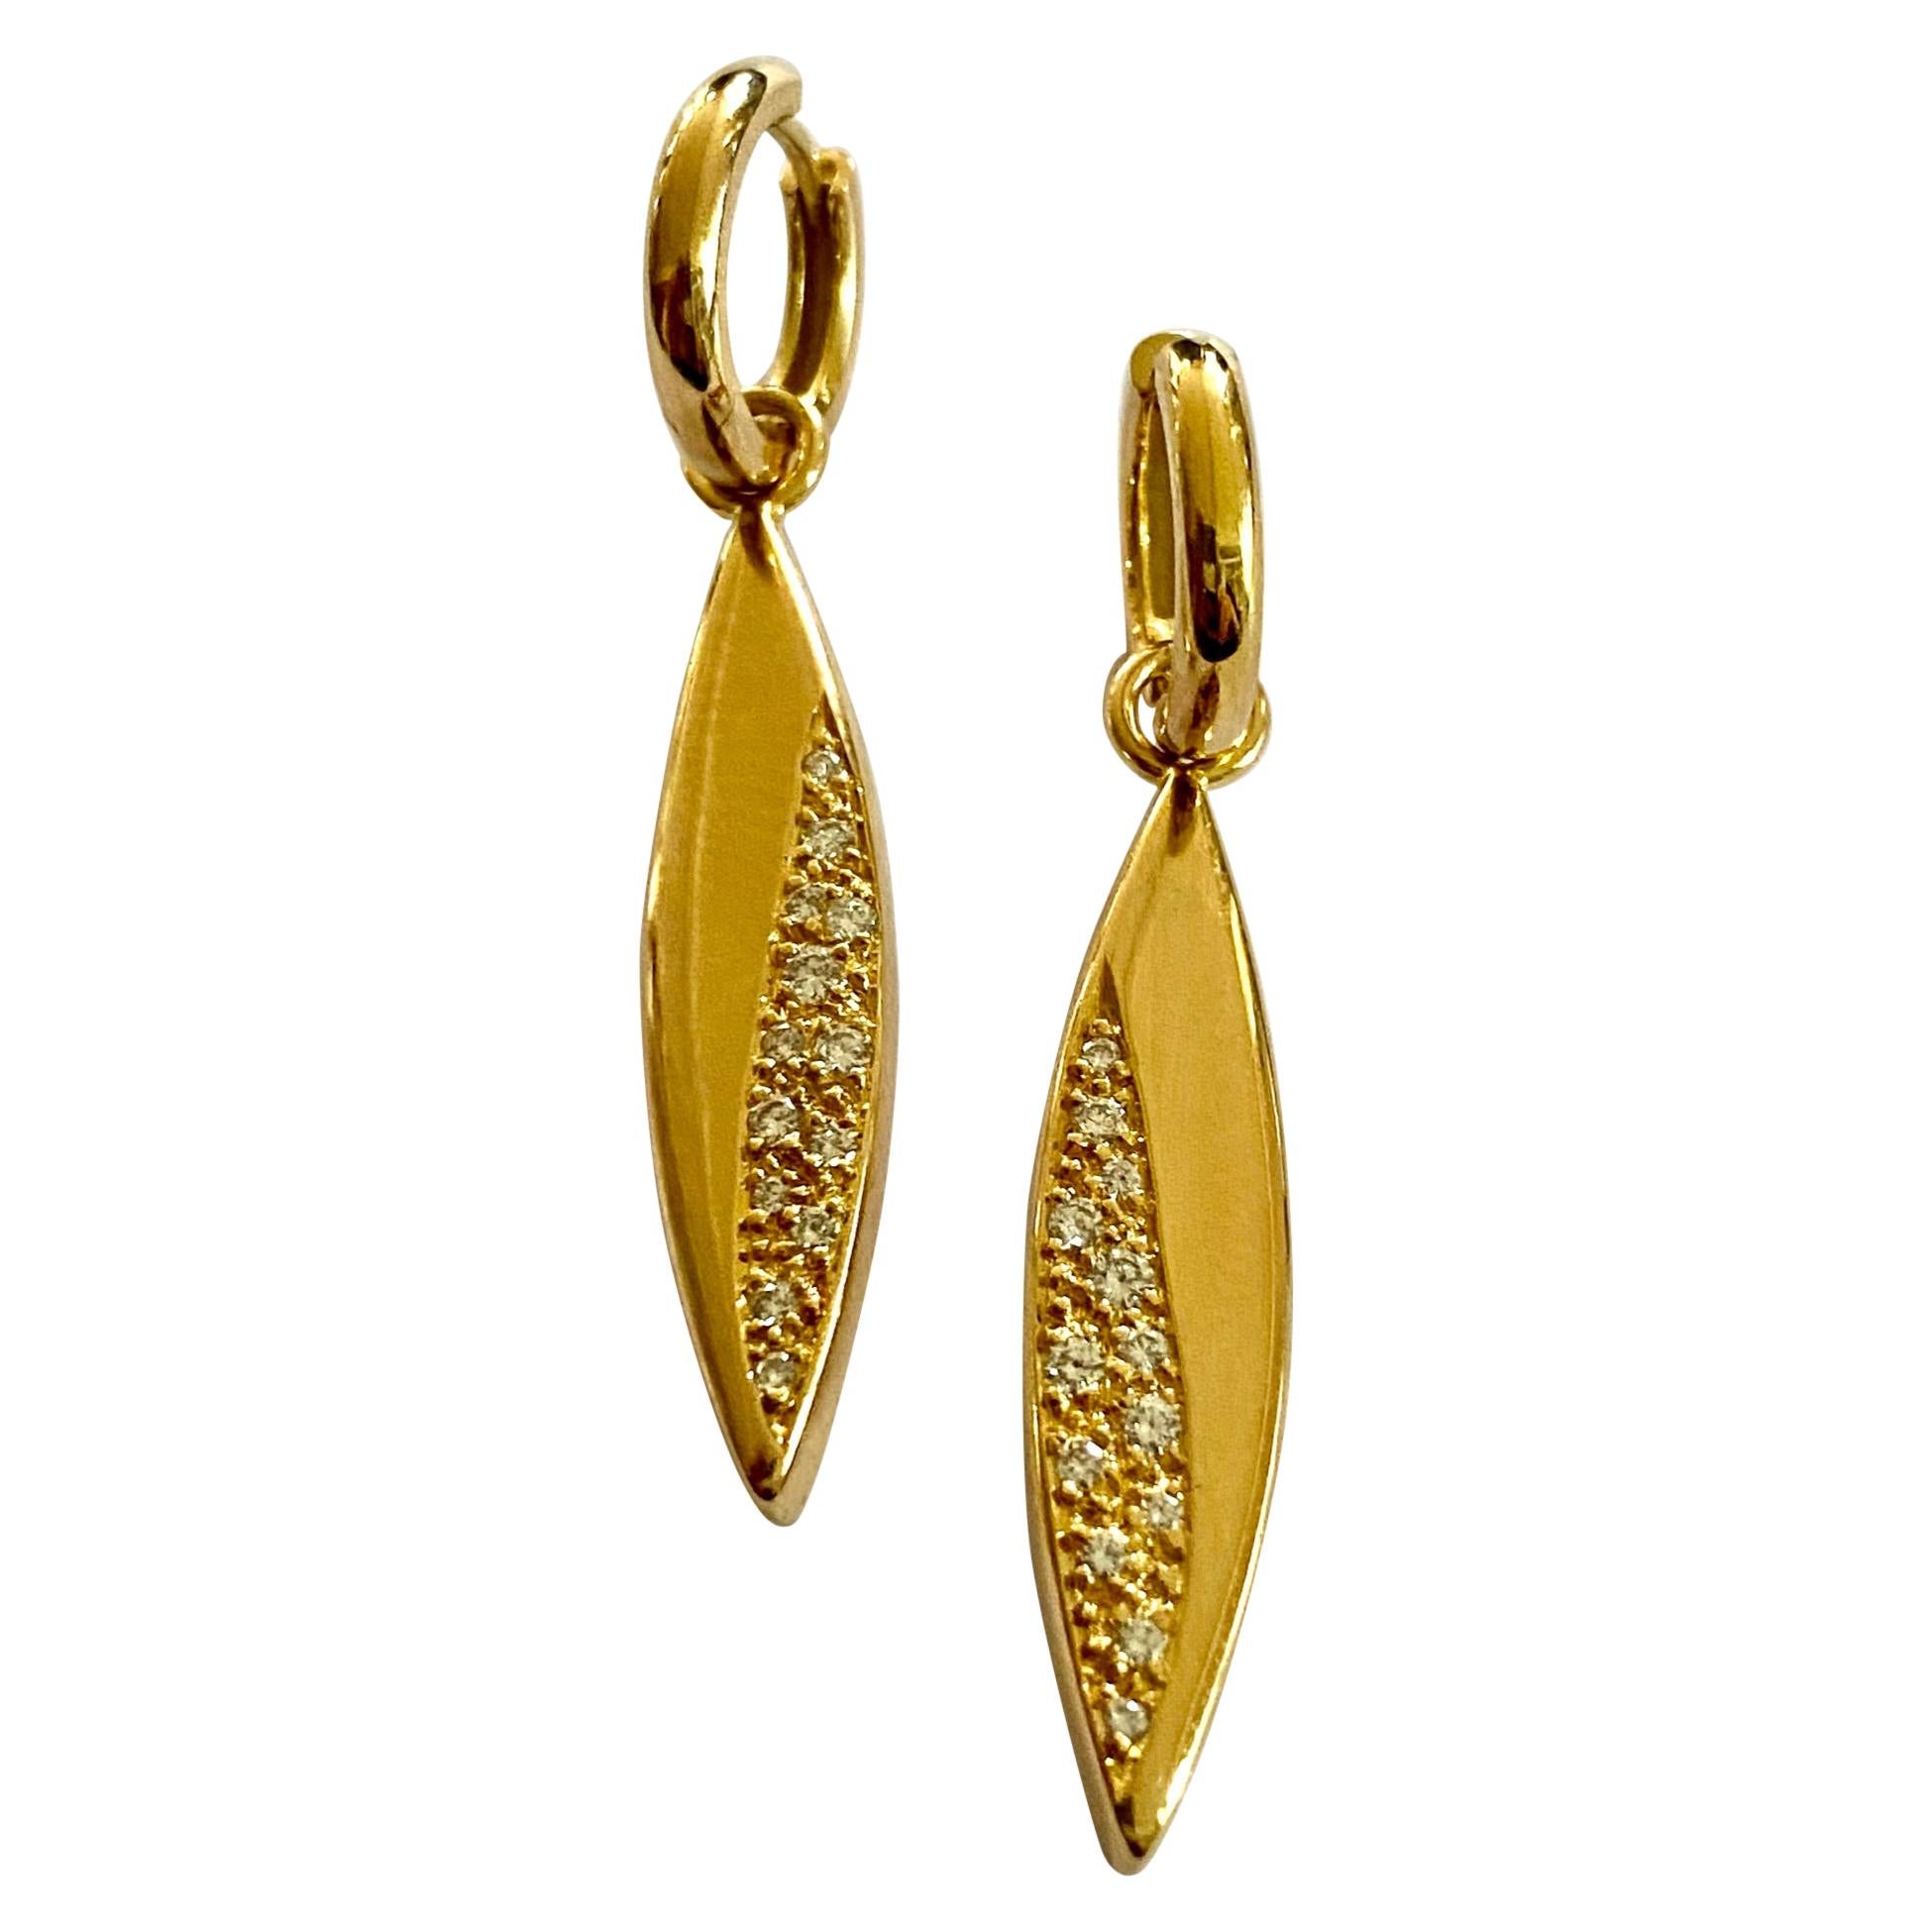 One Pair of 18 Karat Yellow Gold Earrings, Set with Diamonds, Germany, 1970